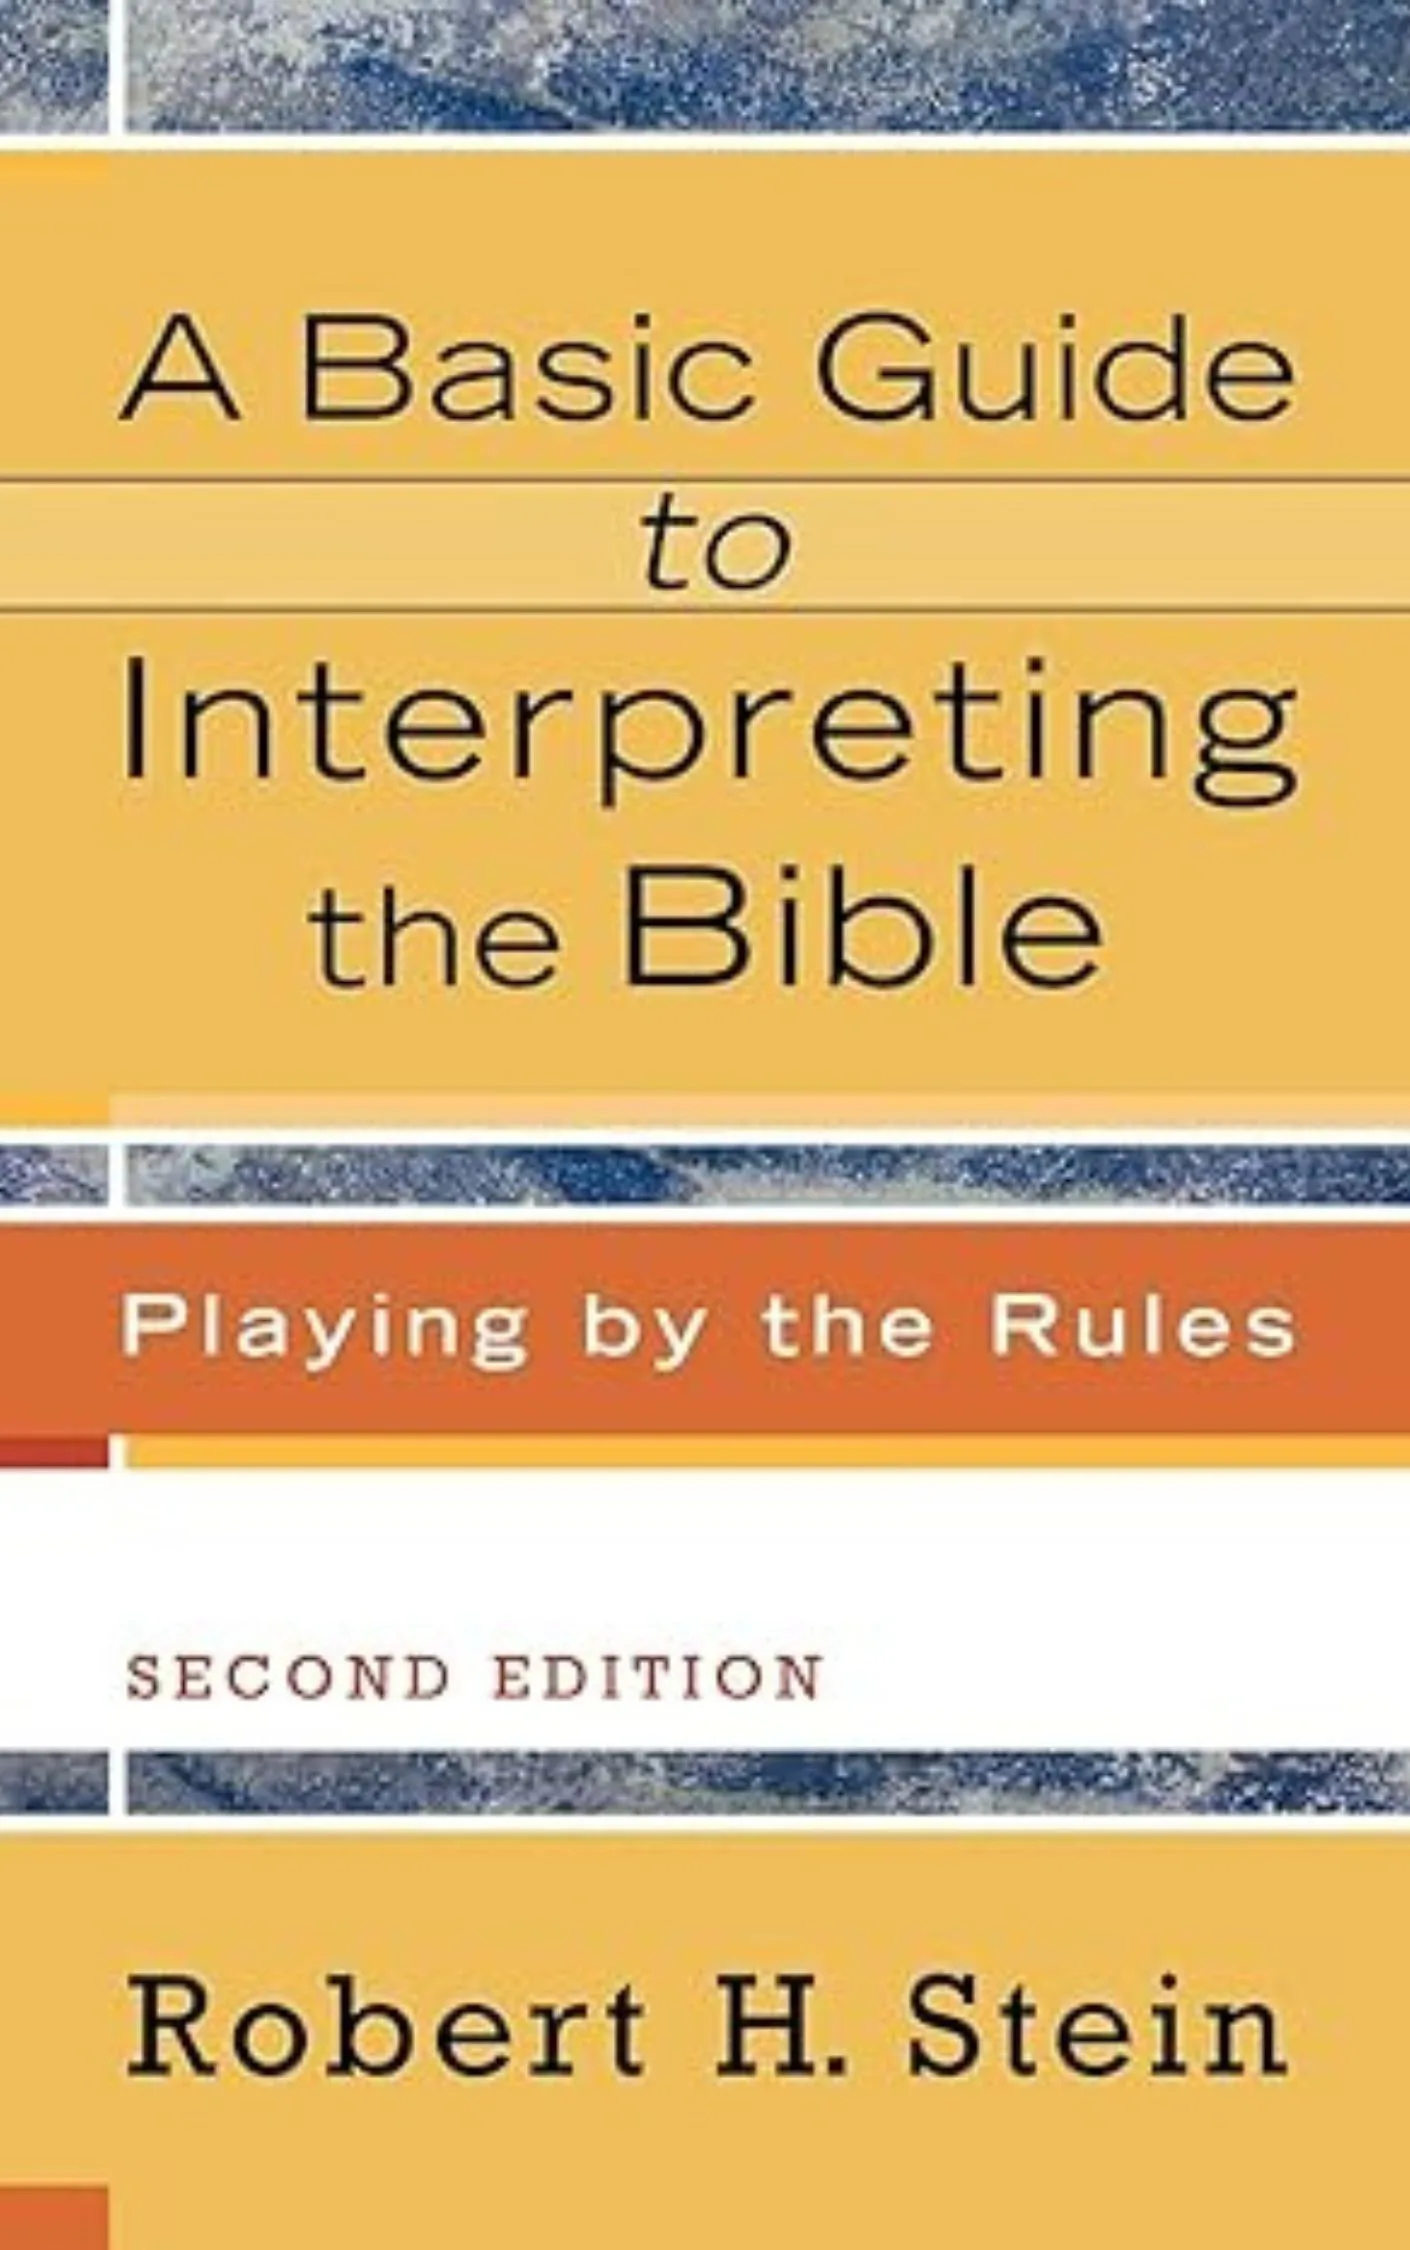 A Basic Guide to Interpreting the Bible by Robert Stein